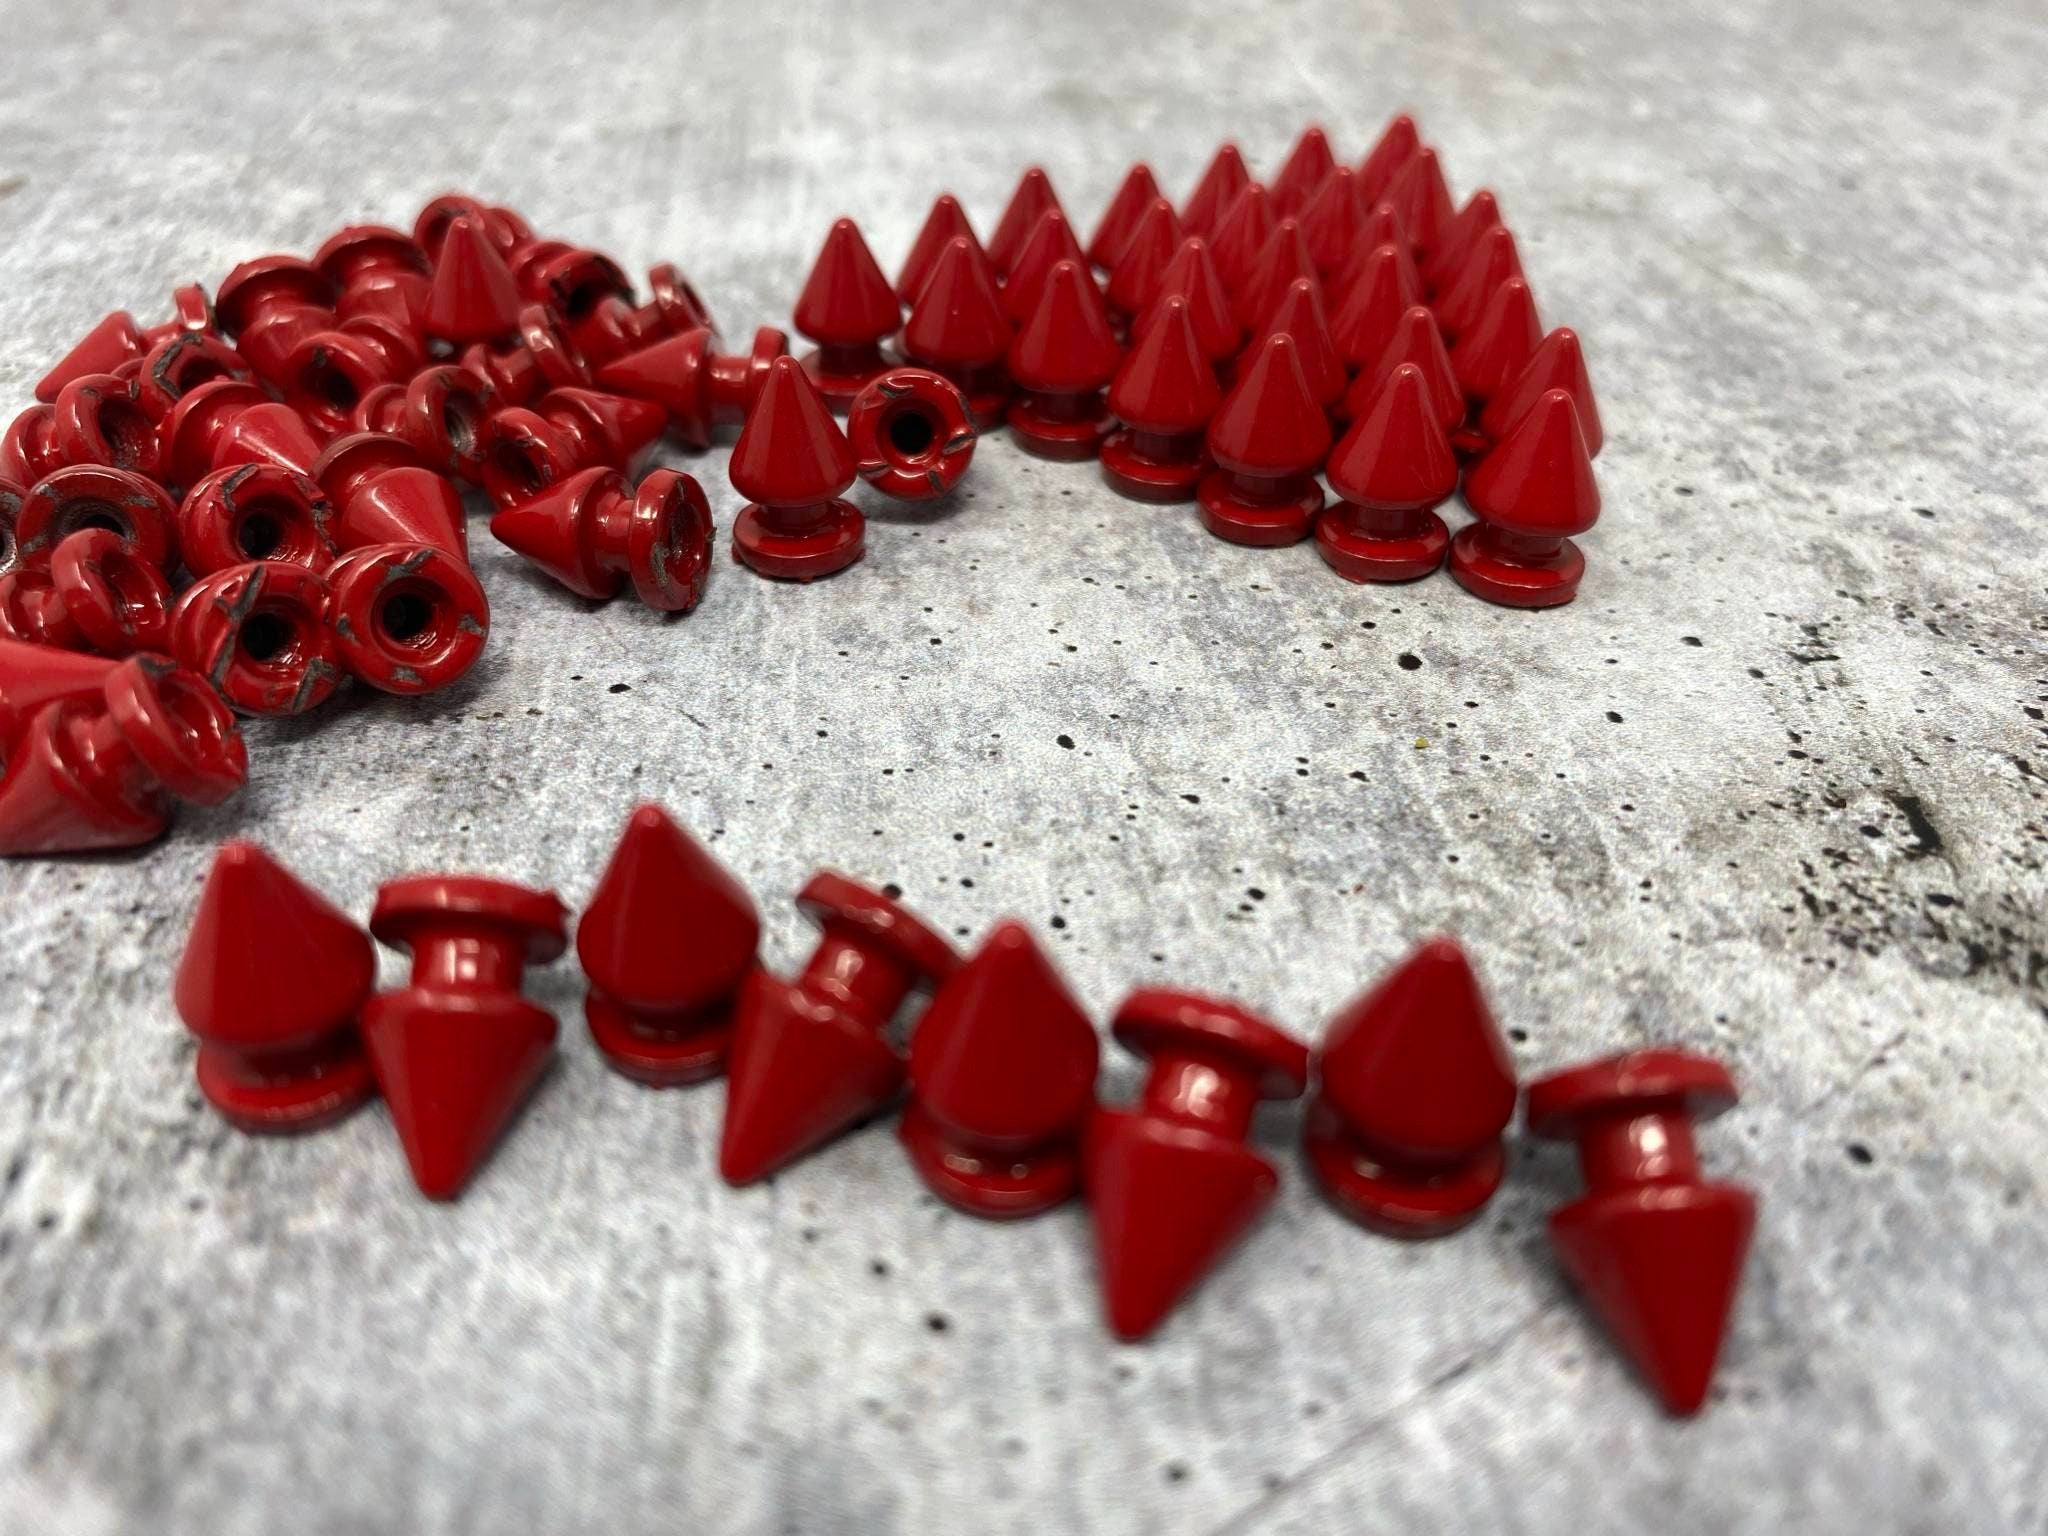 New,"Red" Spikes, 12mm, 100-pcs, Spikes w/Screws, Small Cone Spikes & Studs, Metallic Screw-Back for DIY Punk, Leather, Bags, and Apparel